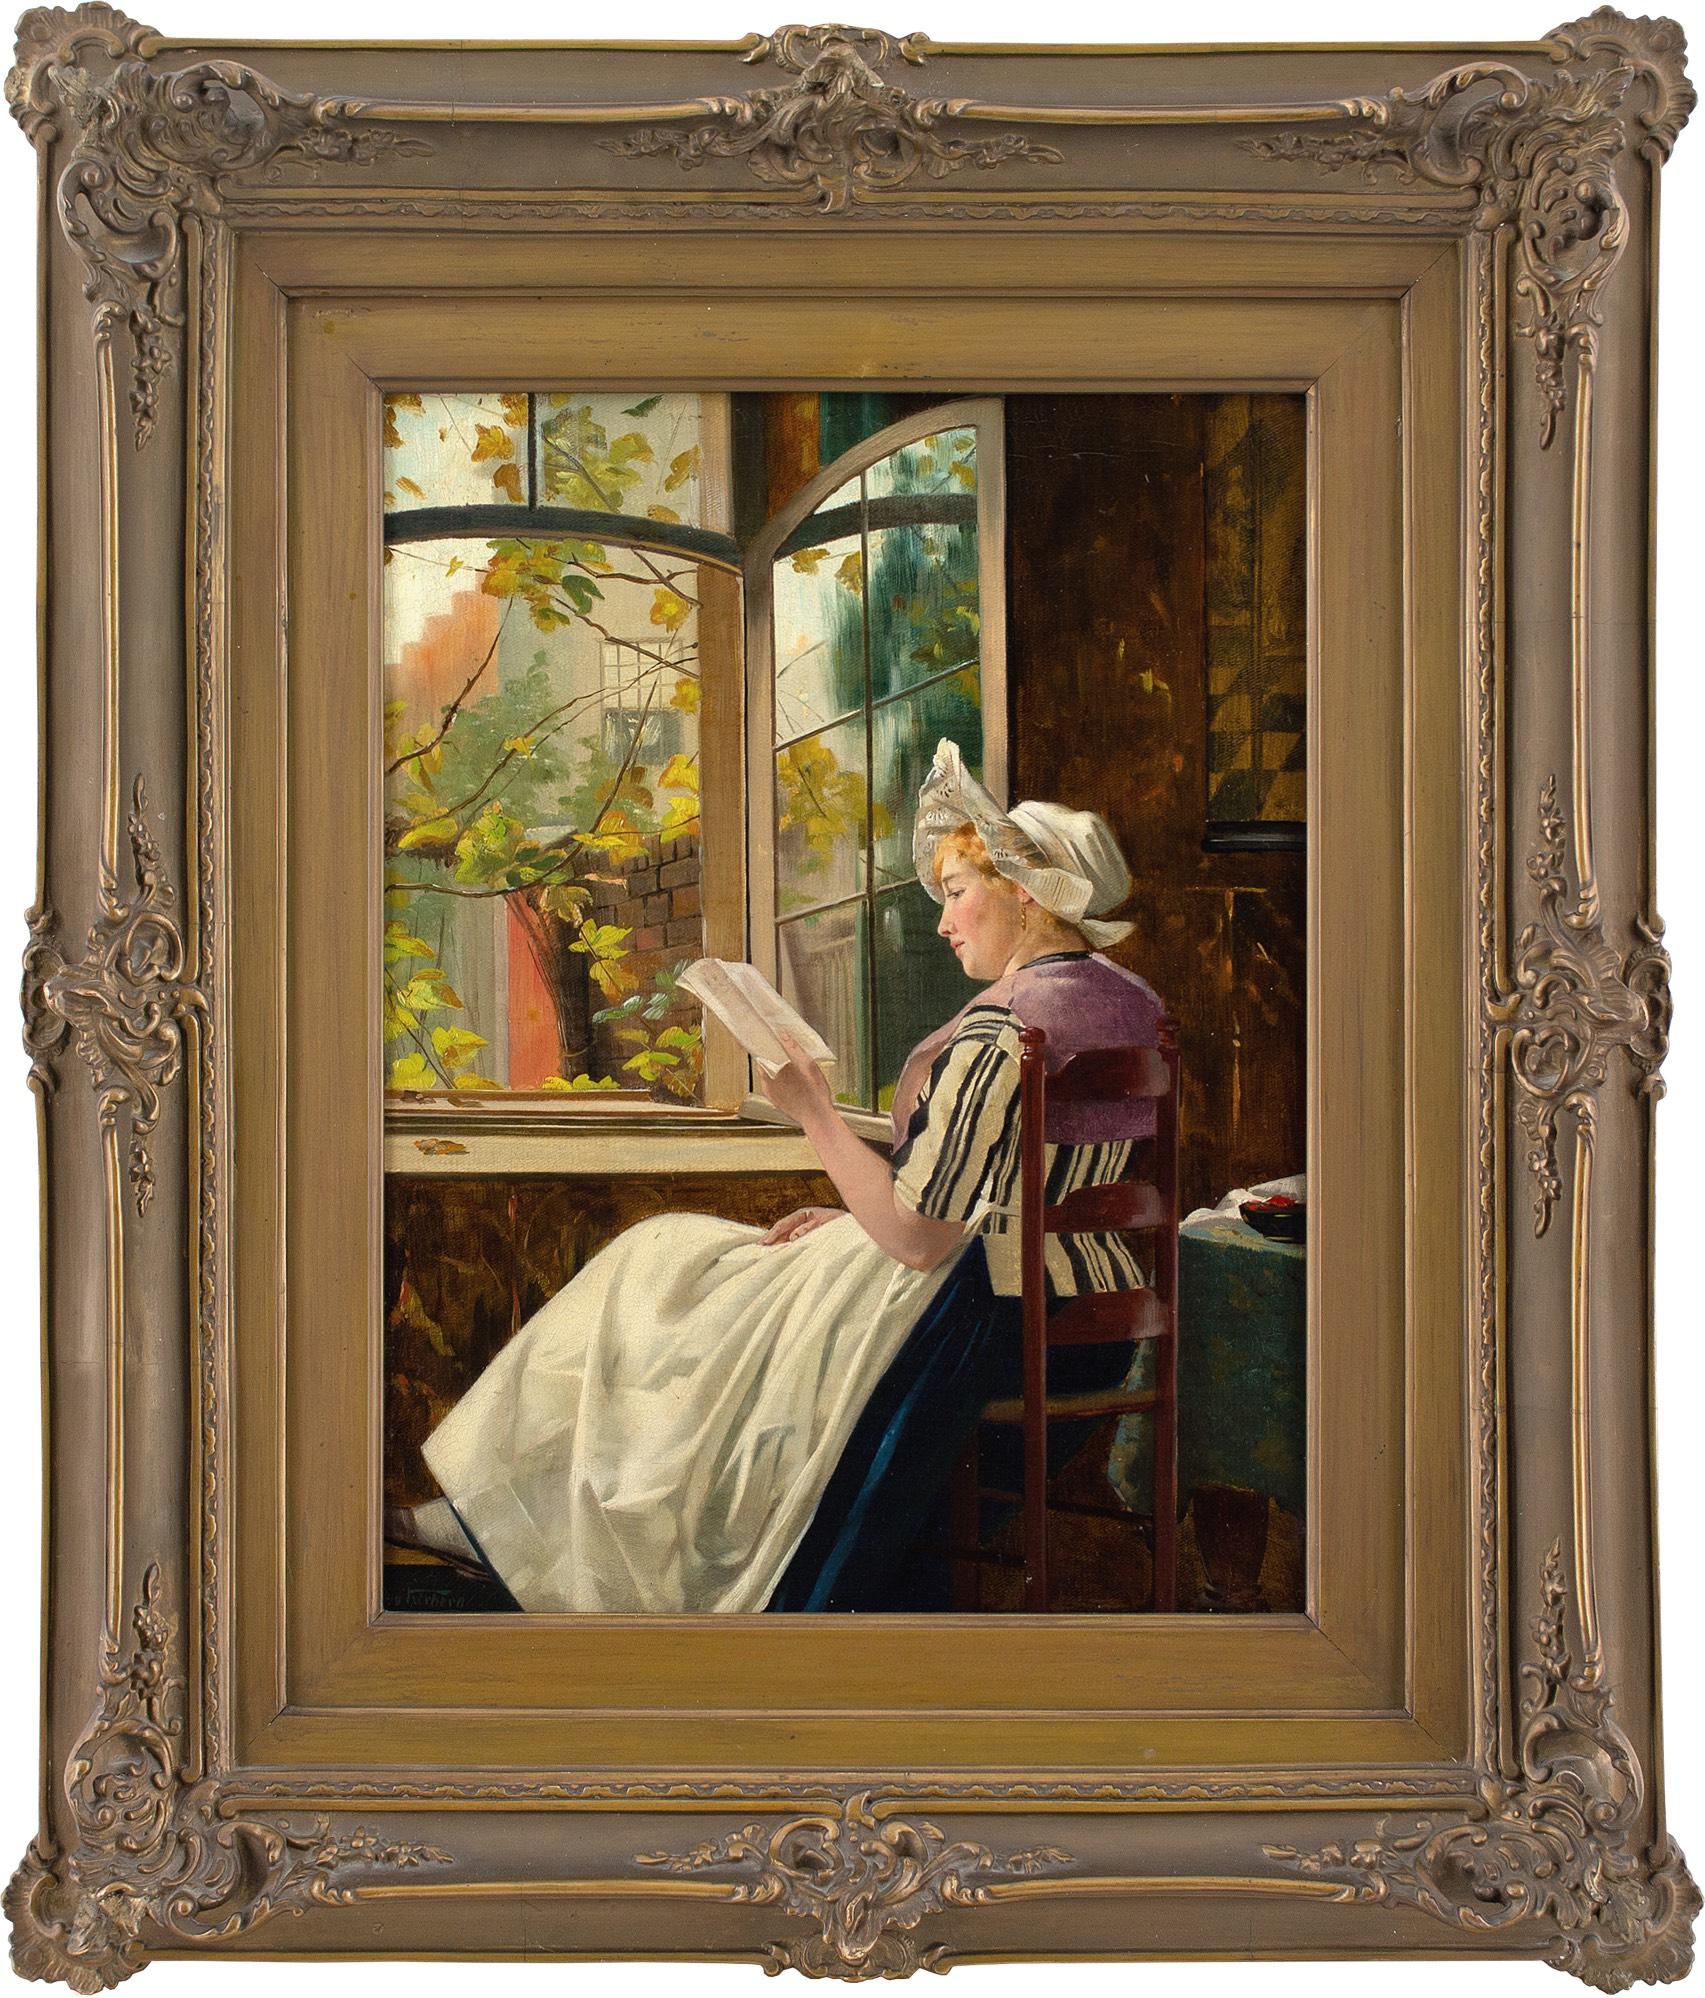 This beautiful late 19th-century oil painting by German artist Otto Kirberg (1850-1926) depicts a young woman reading by an open window. It’s a charming portrayal capturing a moment of calm.

Otto Kirberg was an accomplished painter of genre